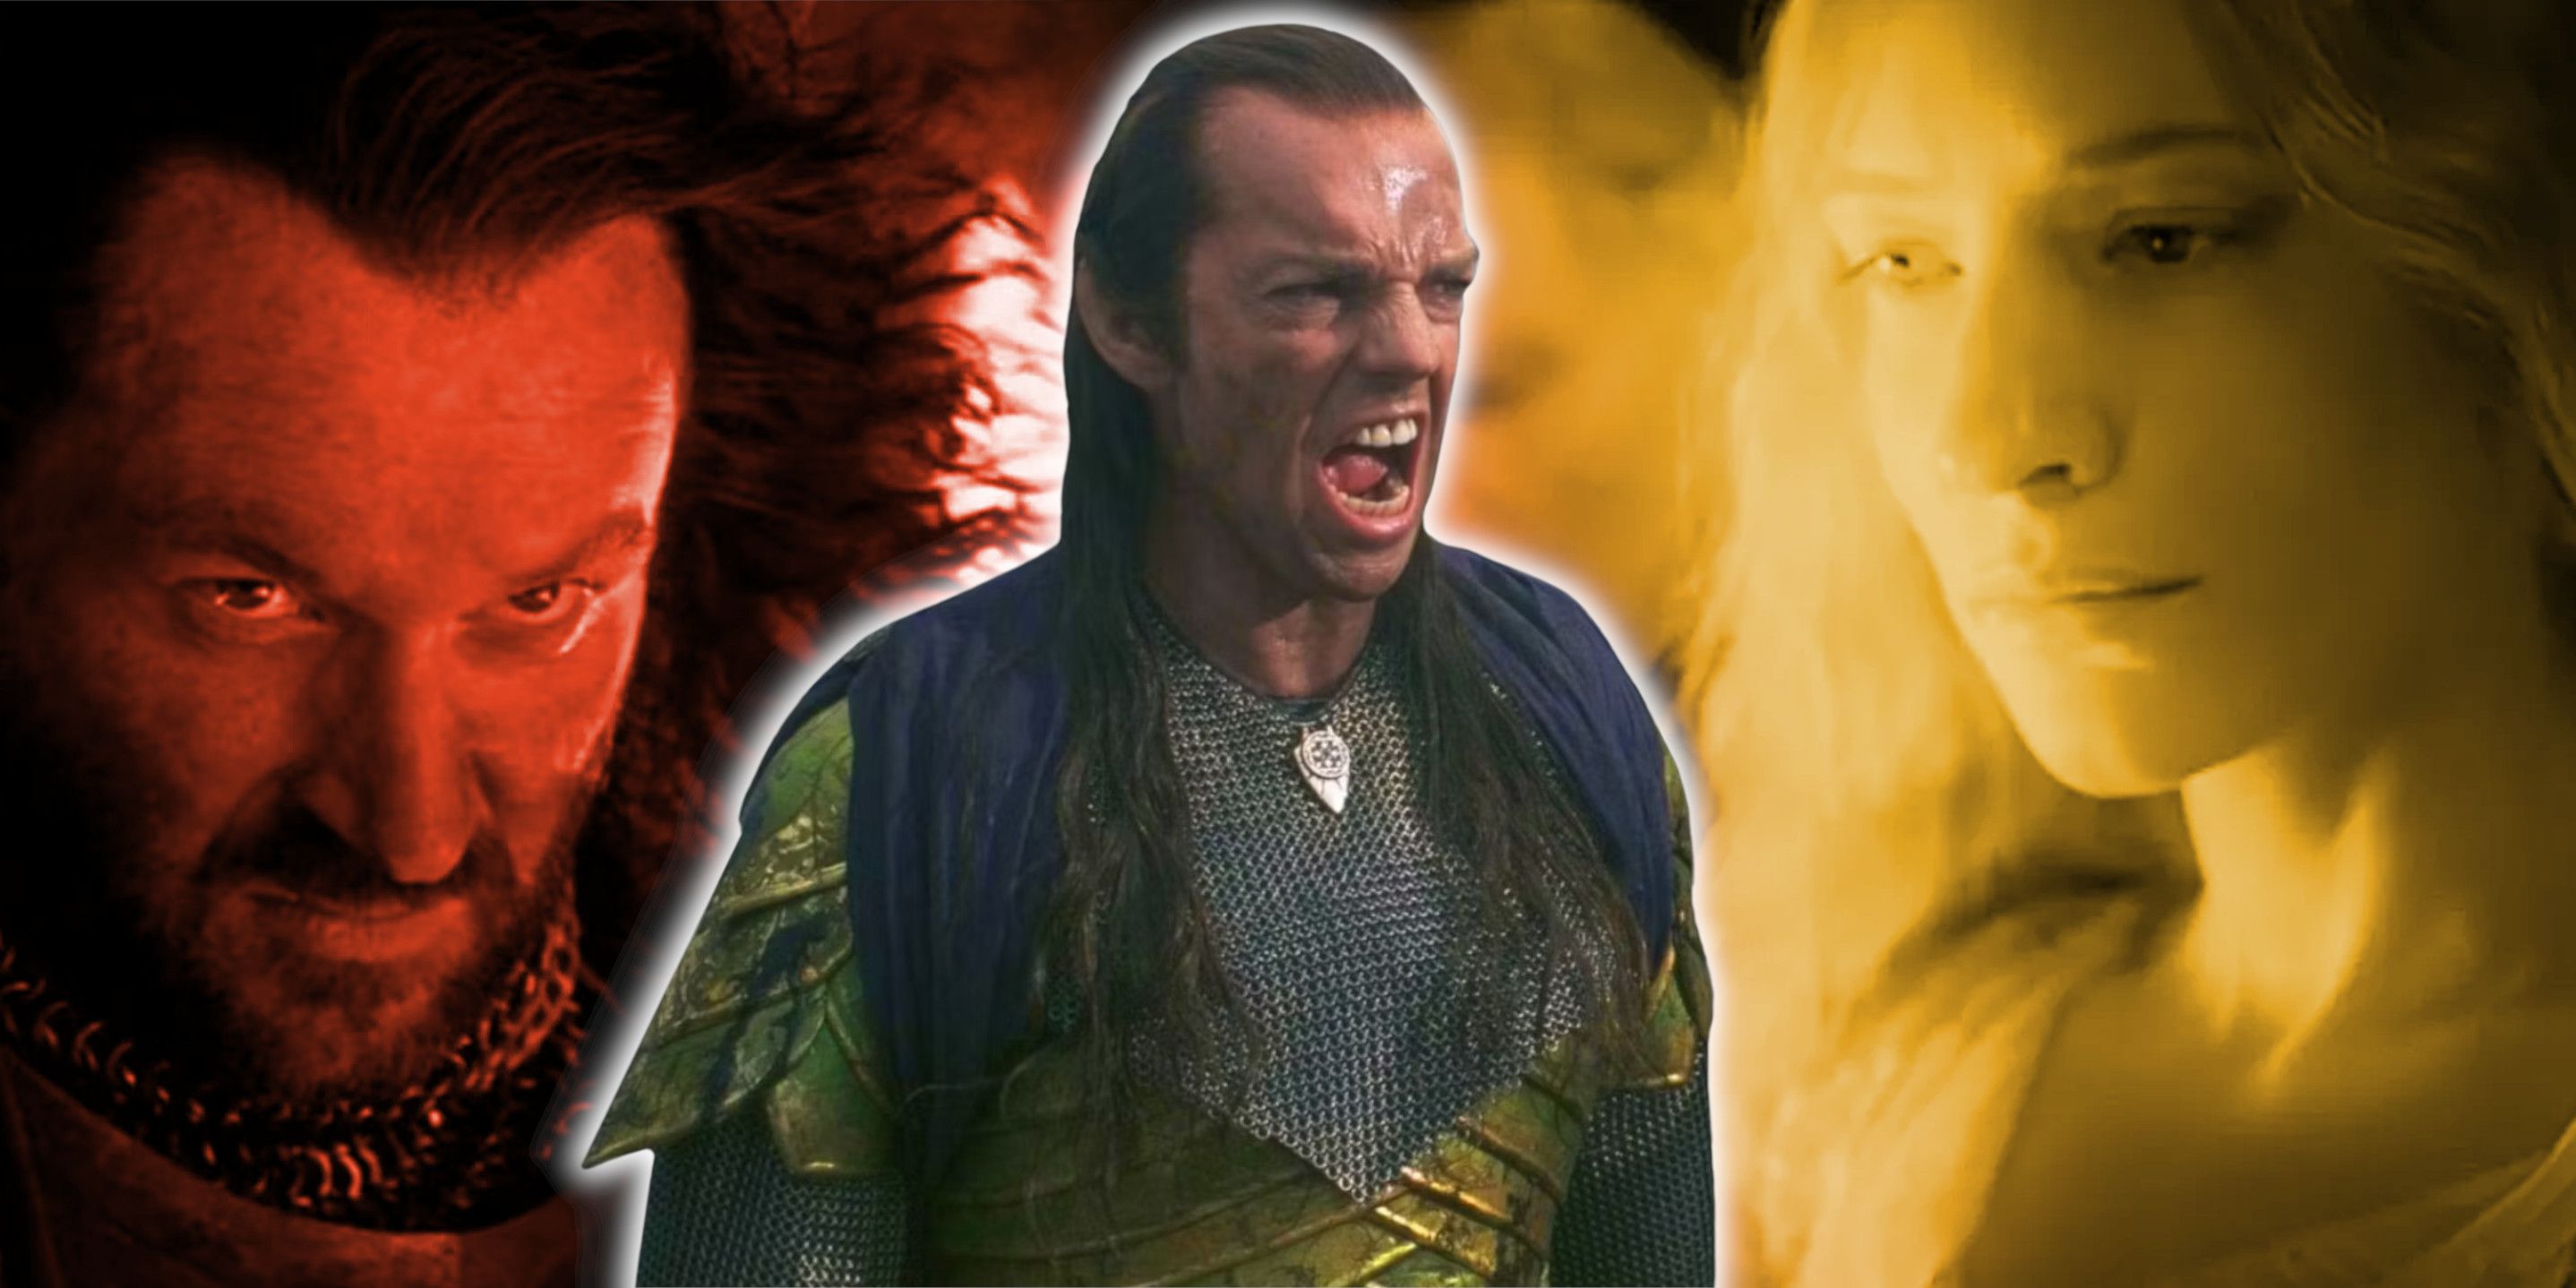 Elrond in front of Isildur and Galadriel from The Lord of the Rings: The Fellowship of the Ring